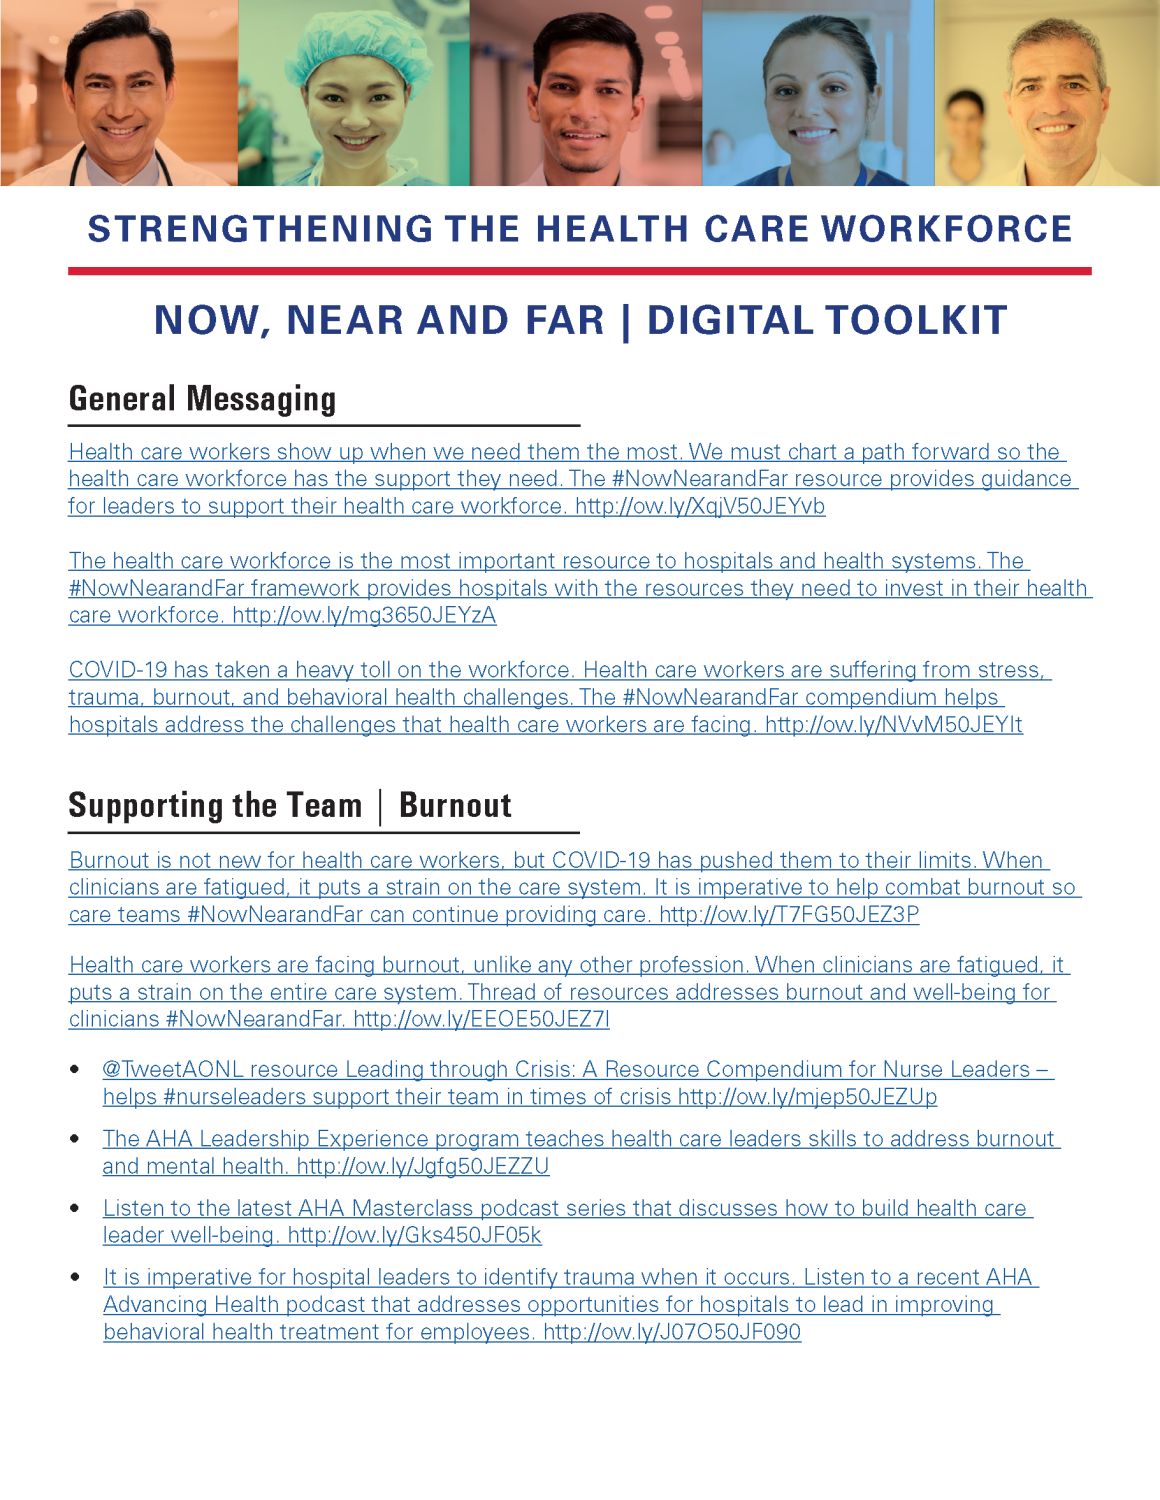 Strengthening the Health Care Workforce: Now, Near and Far: Digital Toolkit page 1.